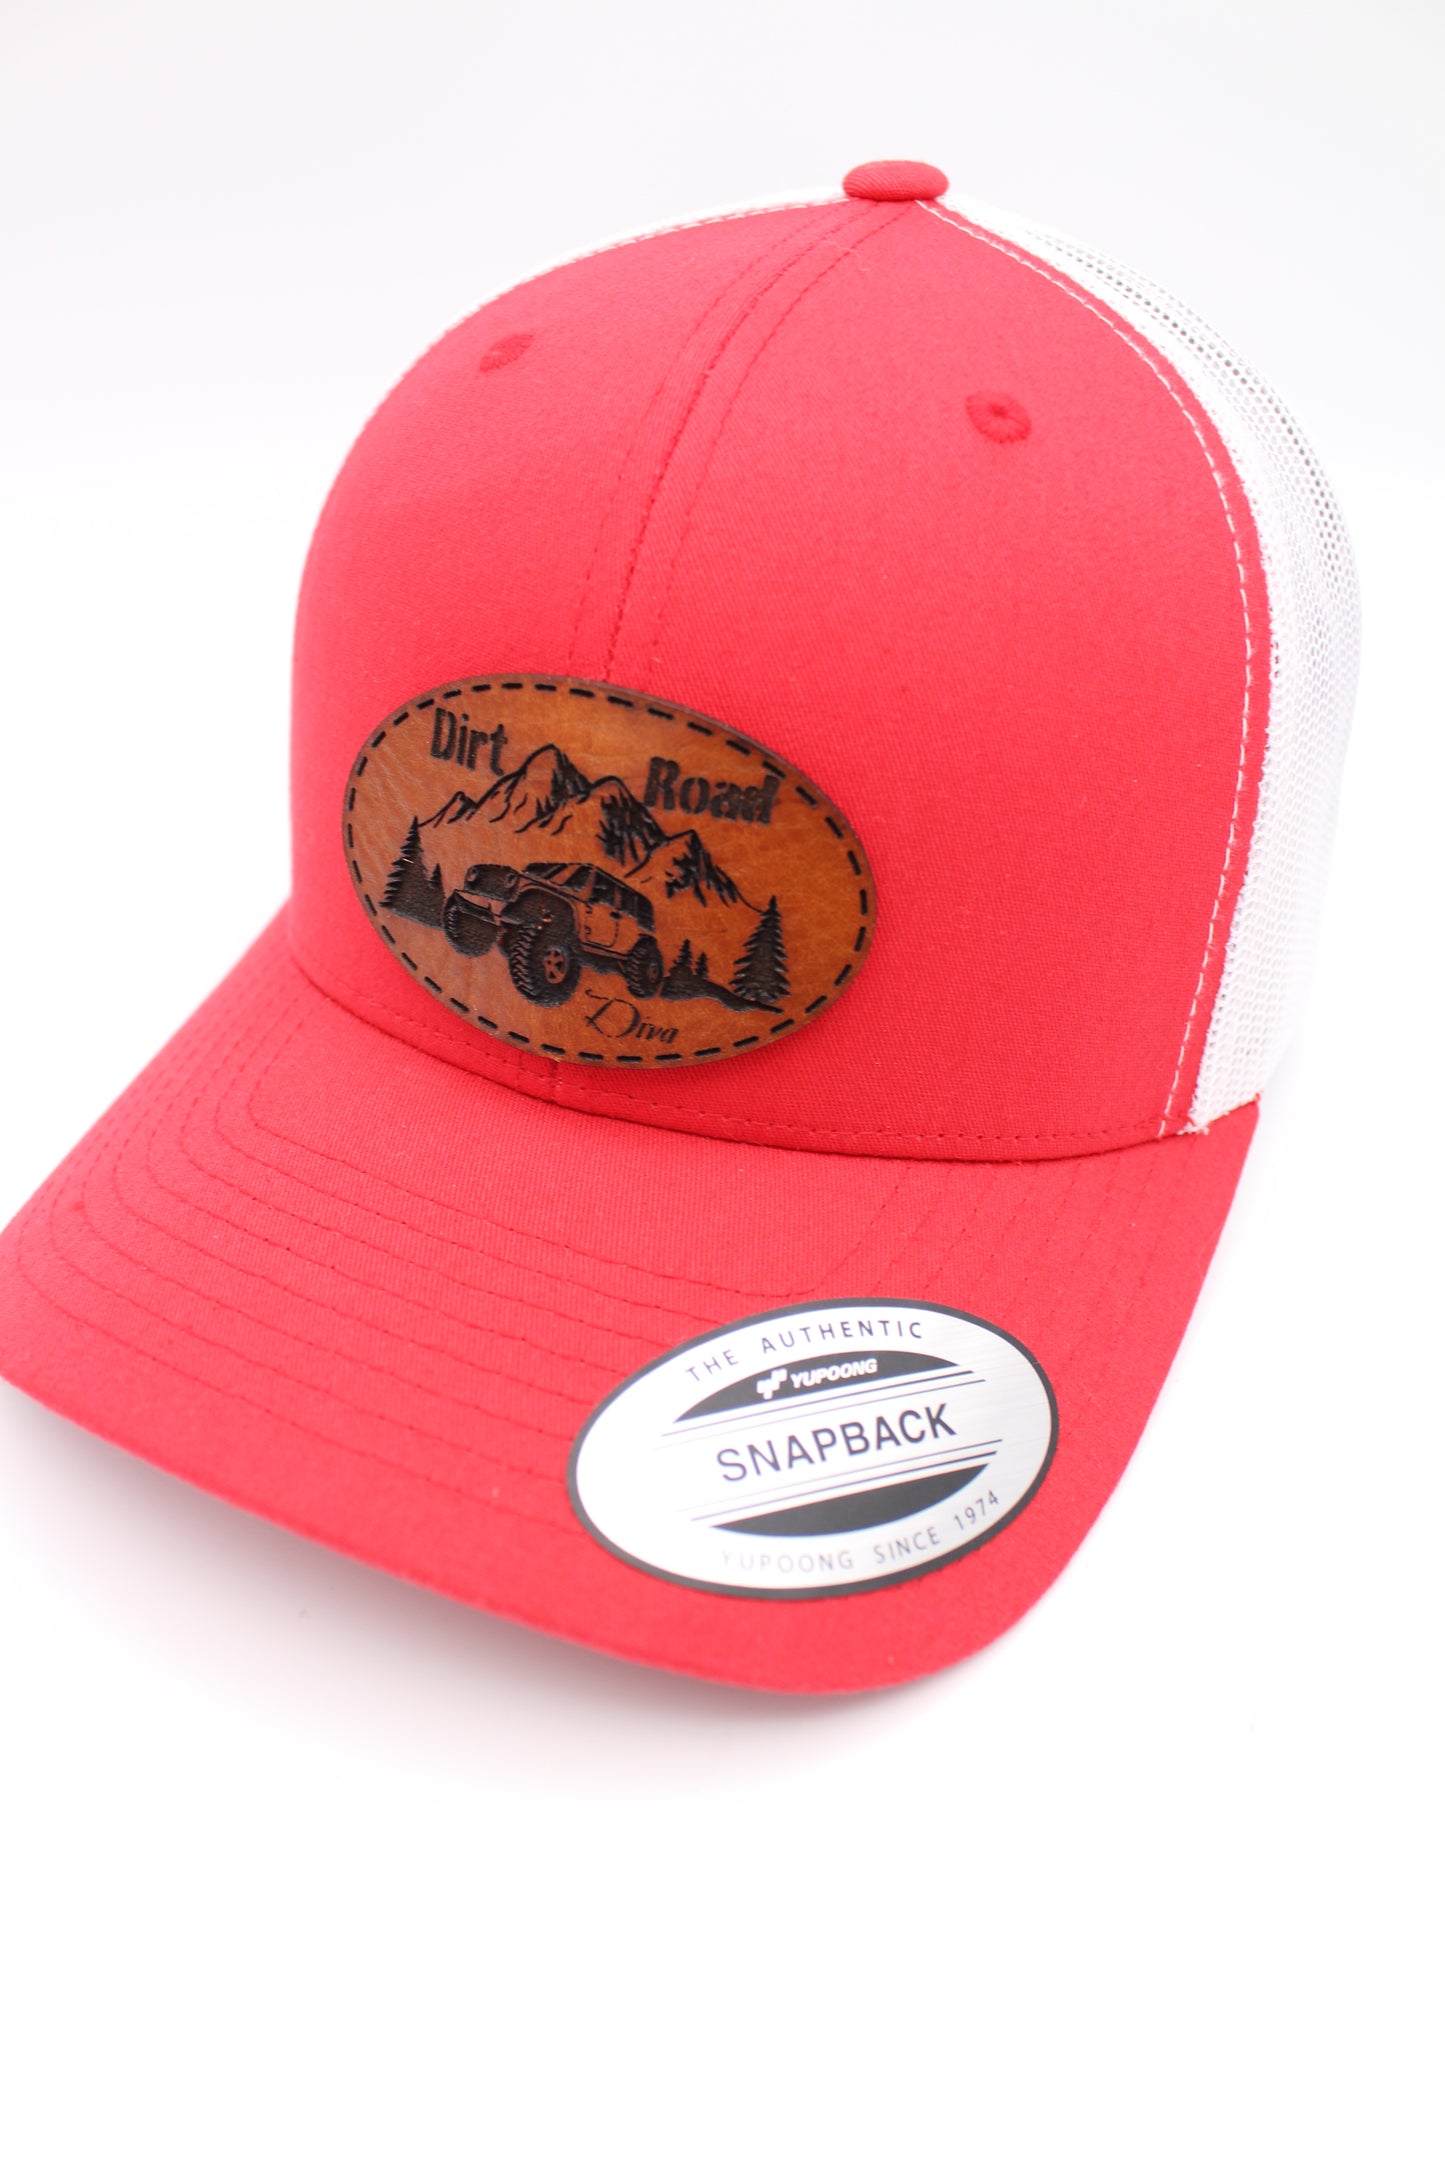 Off Road Leather Hat Patch |  Off Road Trucker Hat | Outdoors Life Hat